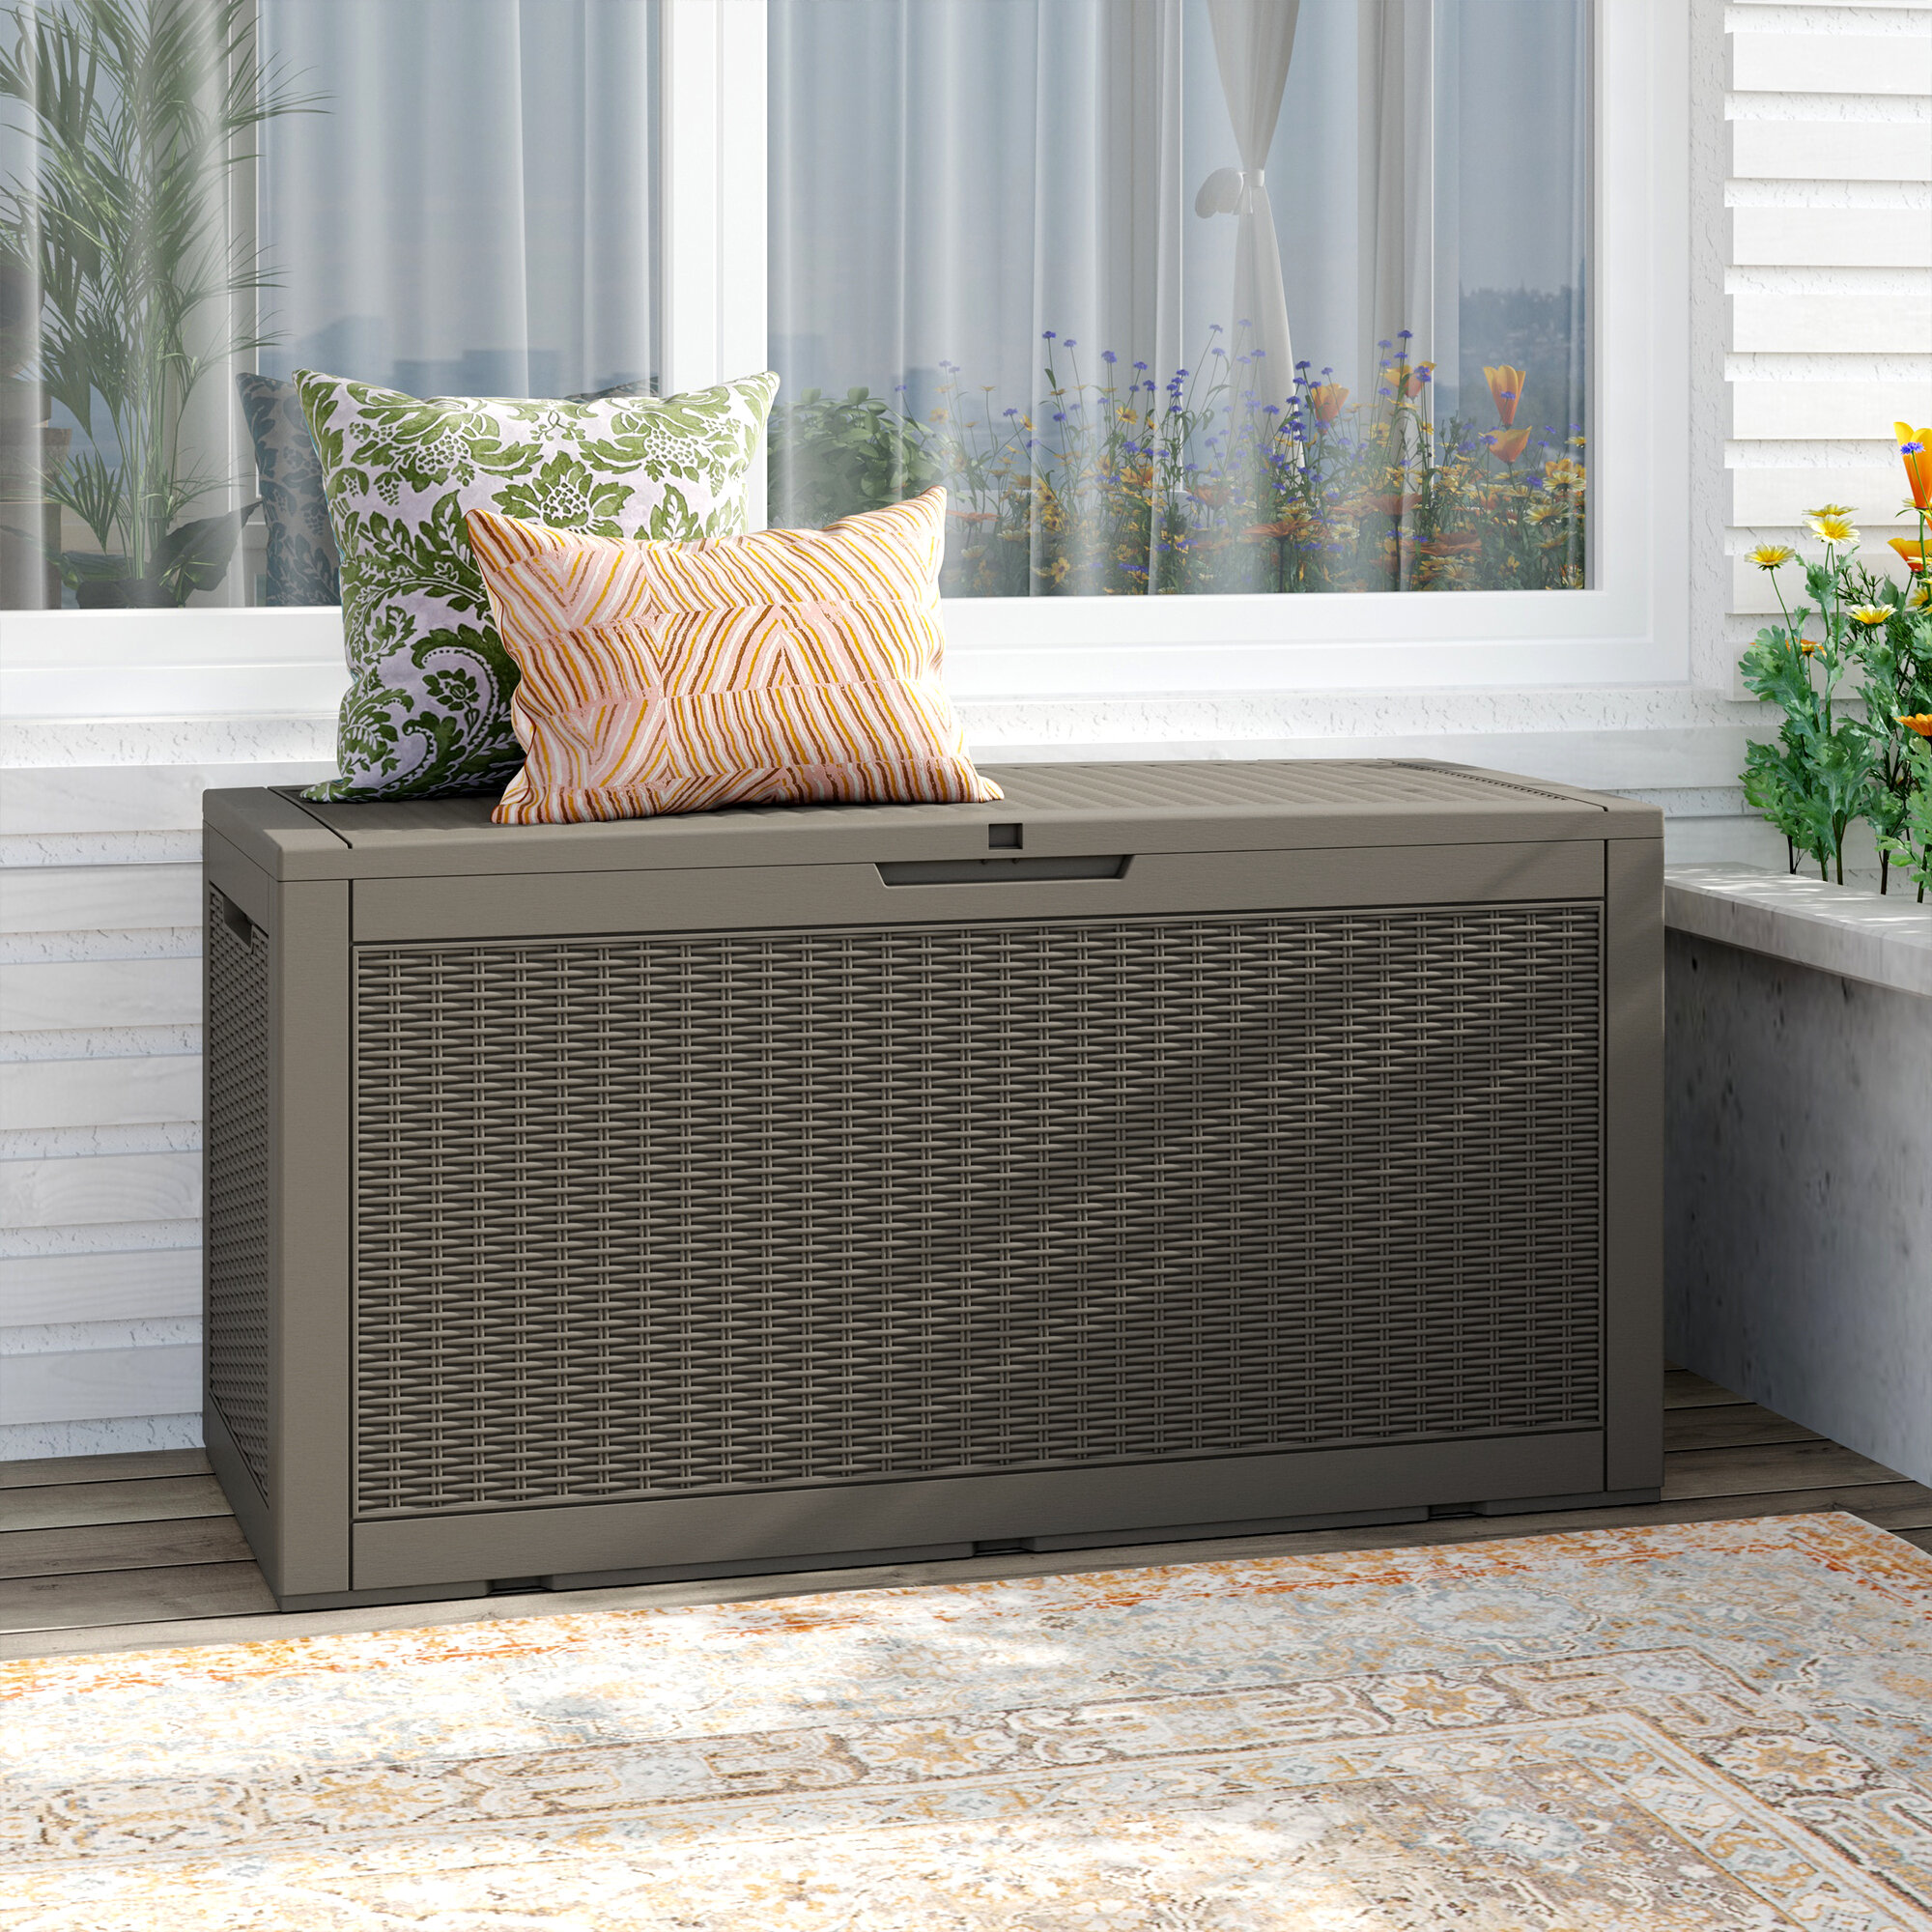  YITAHOME 100 Gallon Large Resin Deck Box Outdoor Storage with  Cushion for Patio Furniture, Outdoor Cushions, Garden Tools and Pool  Supplies-Waterproof,Lockable (Dark Grey) : Patio, Lawn & Garden